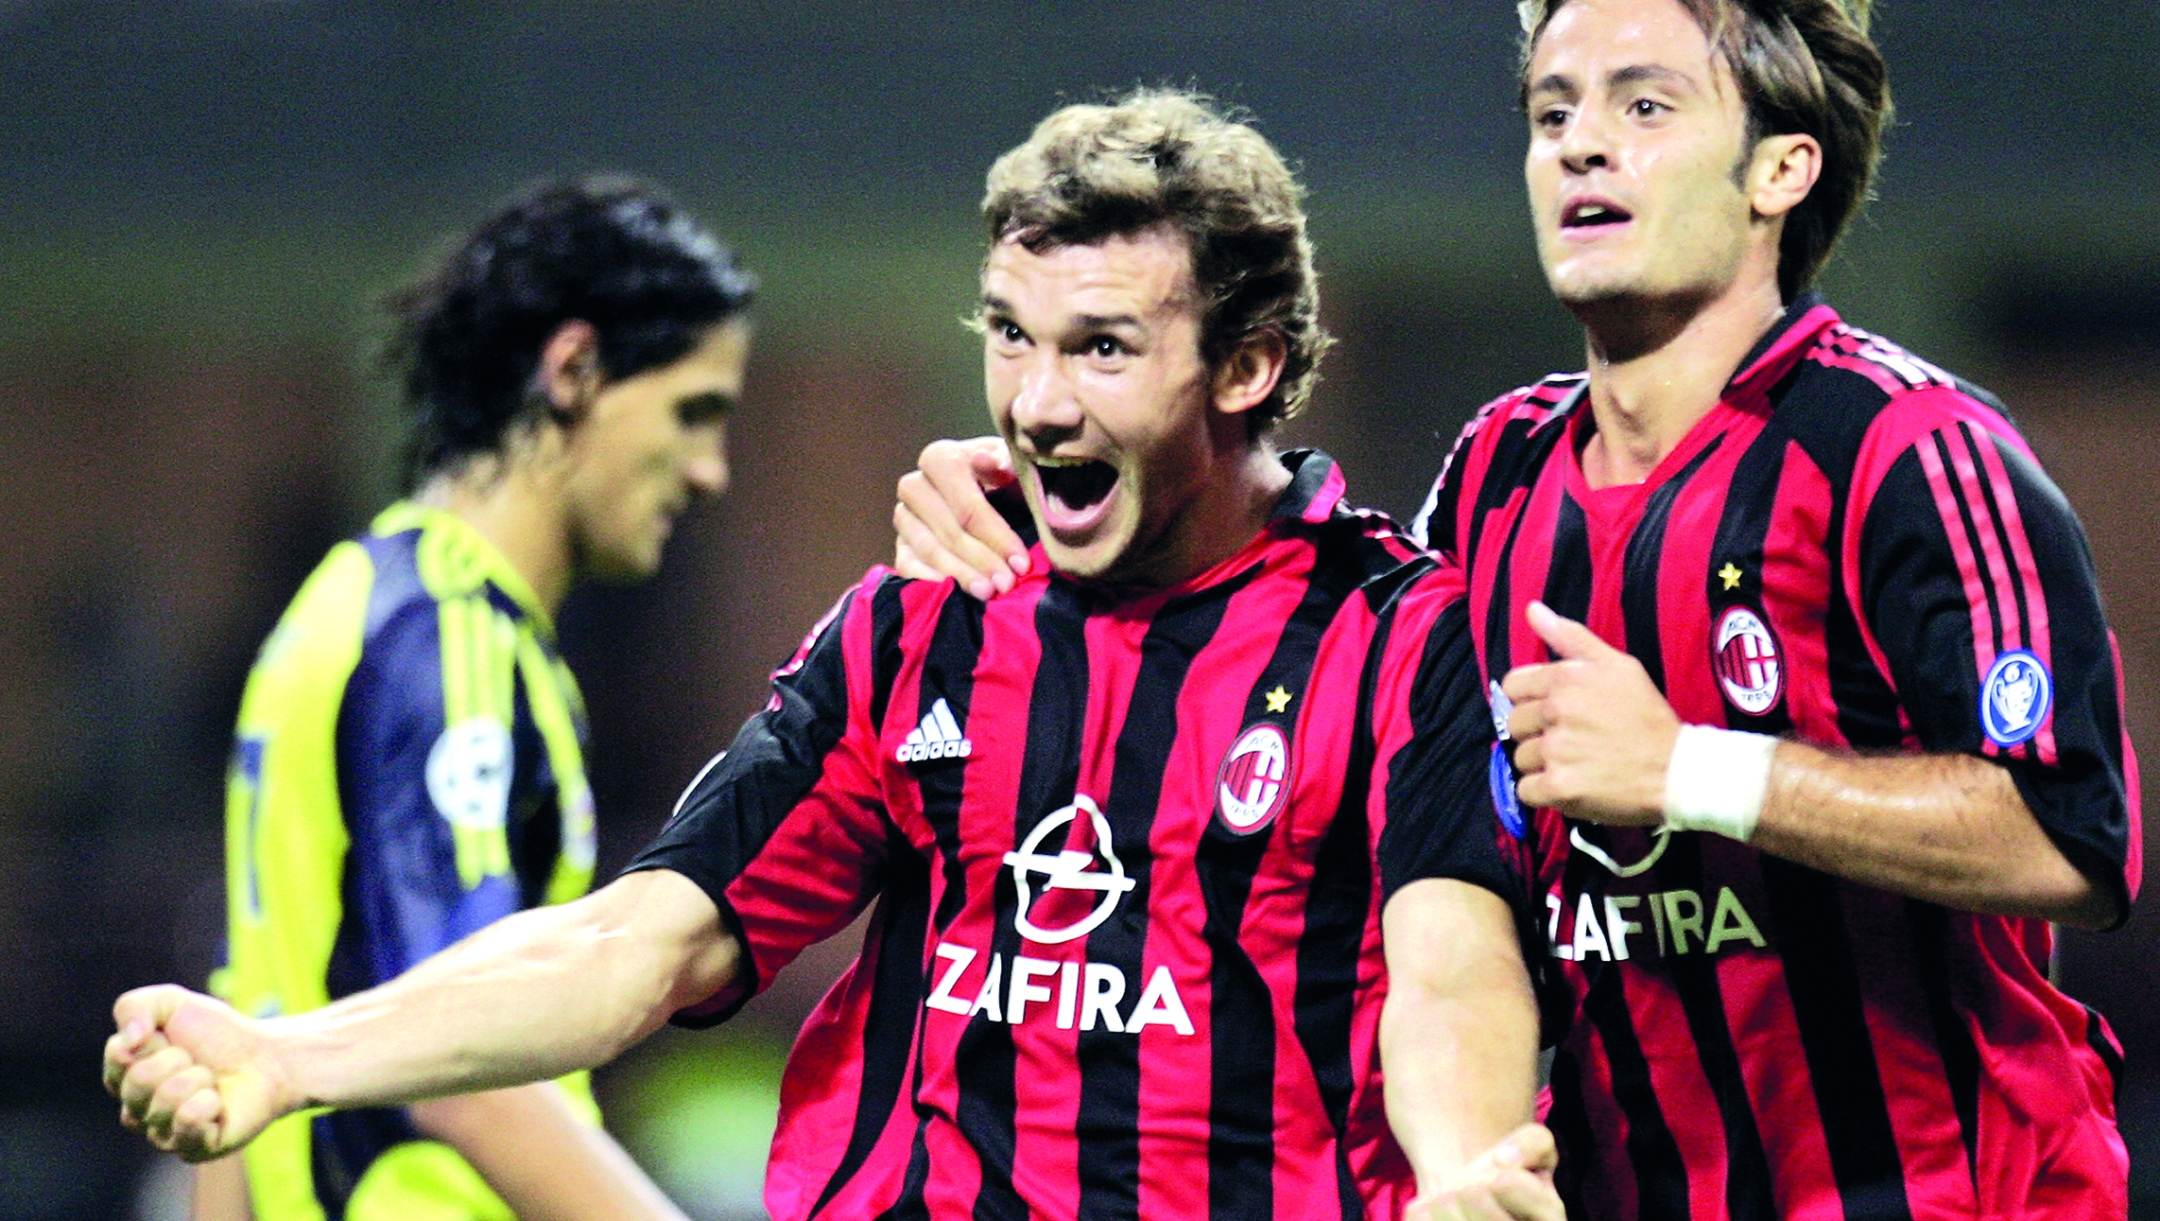 AC Milan's Andriy Shevchenko of Ukraine (L) jubilates with his teammate Alberto Gilardino after scoring his side third goal against Fenerbahce SK during their Champion's league football match in Milan's S. Siro Stadium 13 September 2005. AFP PHOTO / Filippo MONTEFORTE (Photo by FILIPPO MONTEFORTE / AFP)